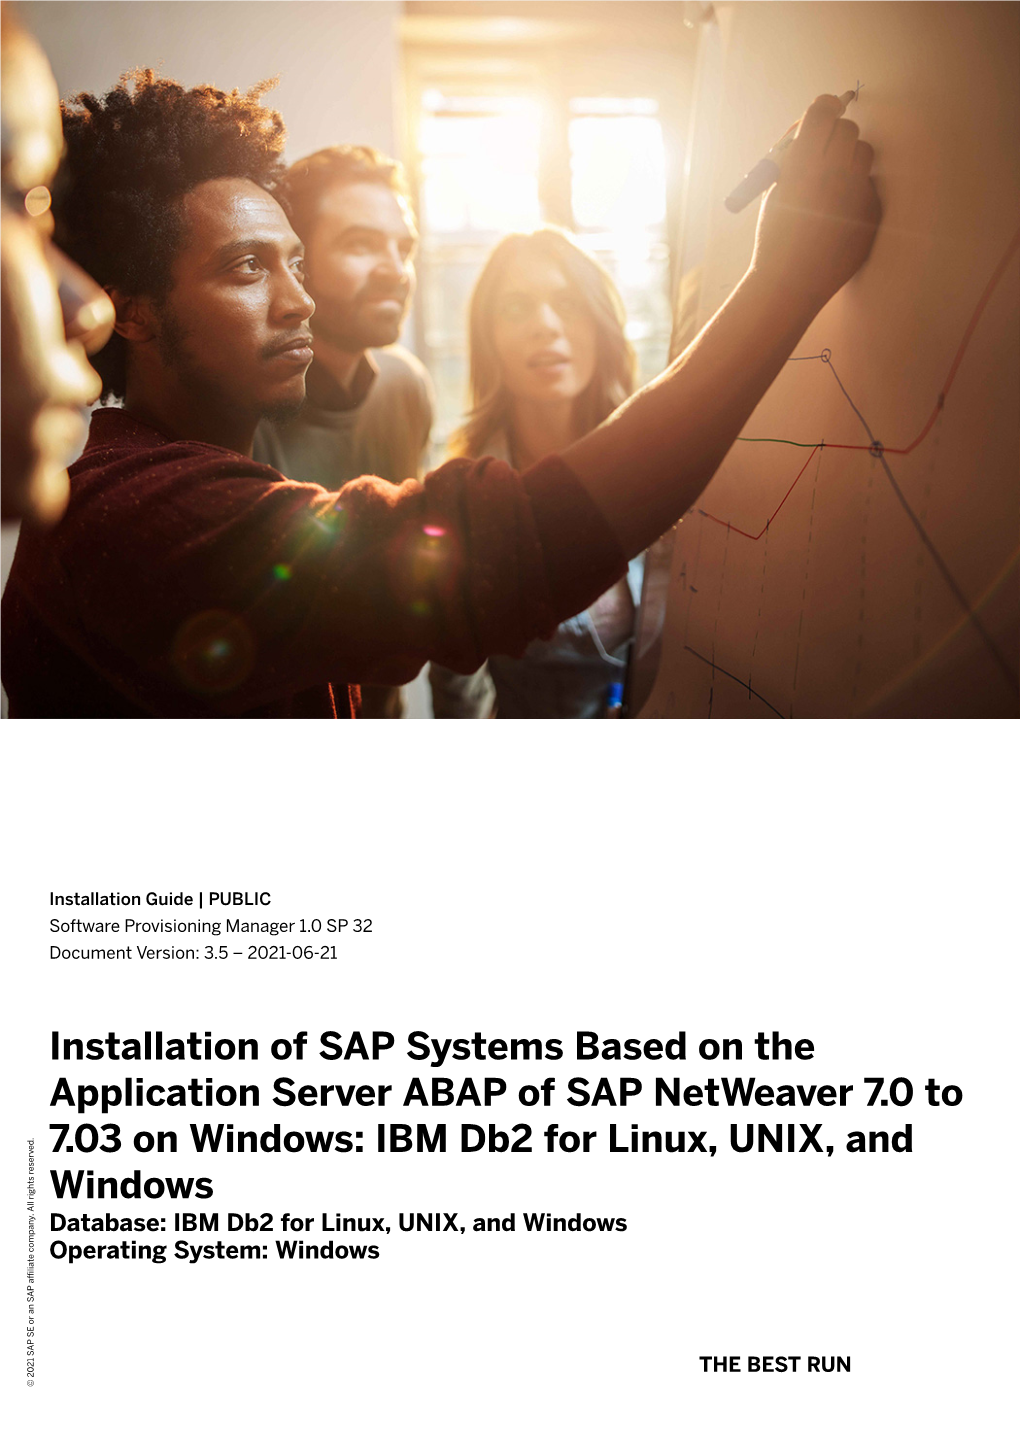 Installation of SAP Systems Based on the Application Server ABAP of SAP Netweaver 7.0 to 7.03 on Windows